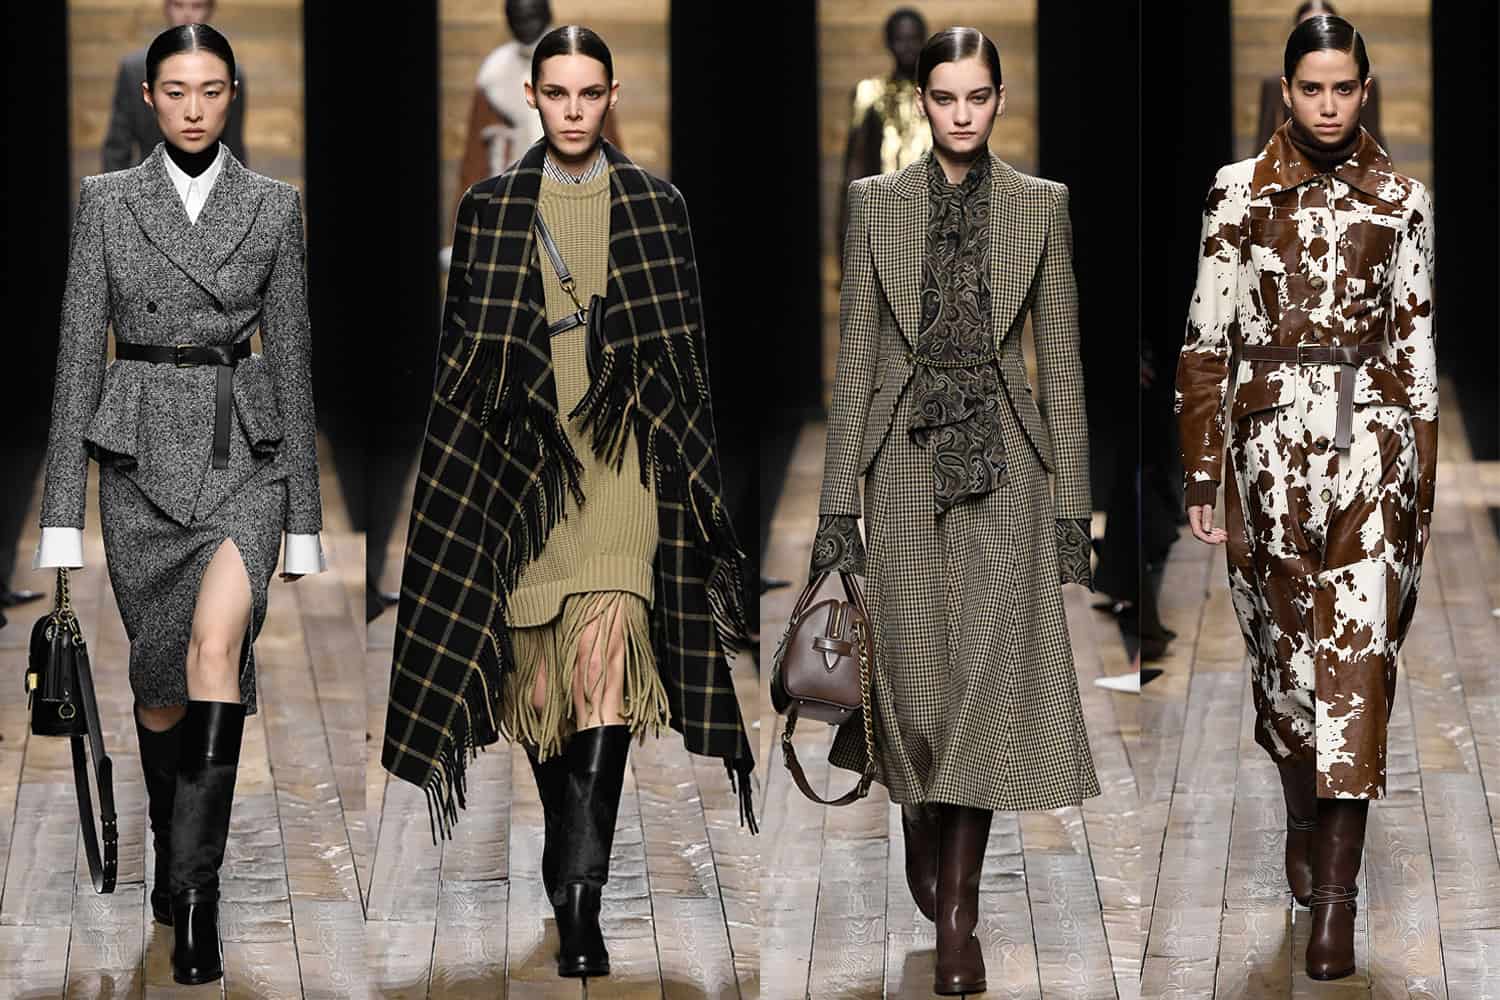 Michael Kors Offers Country, Capes, and 